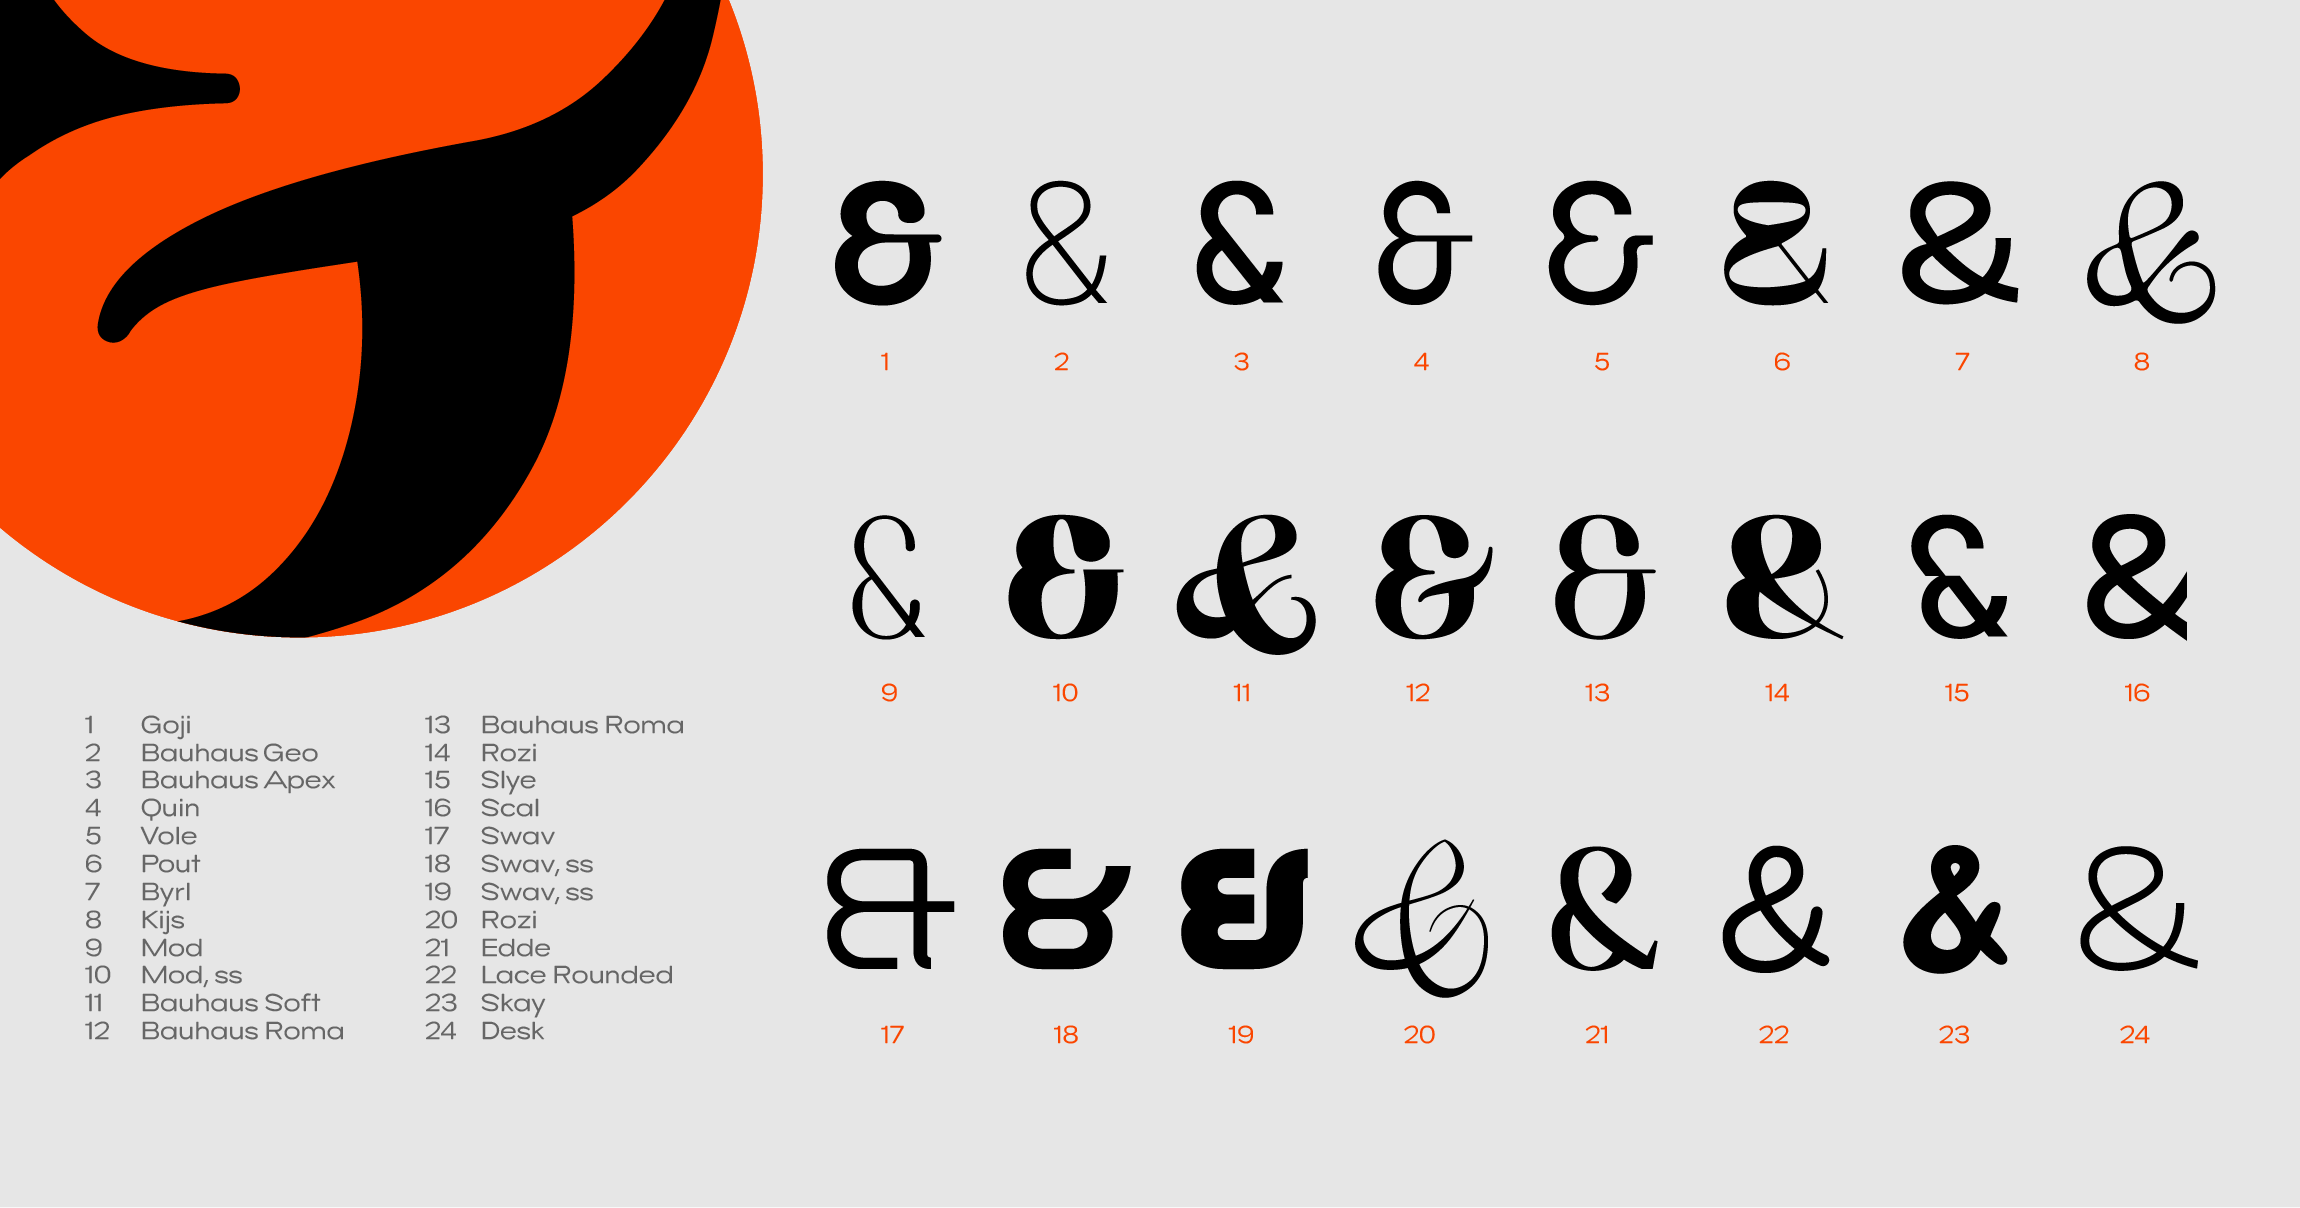 24 ampersand symbols from different fonts